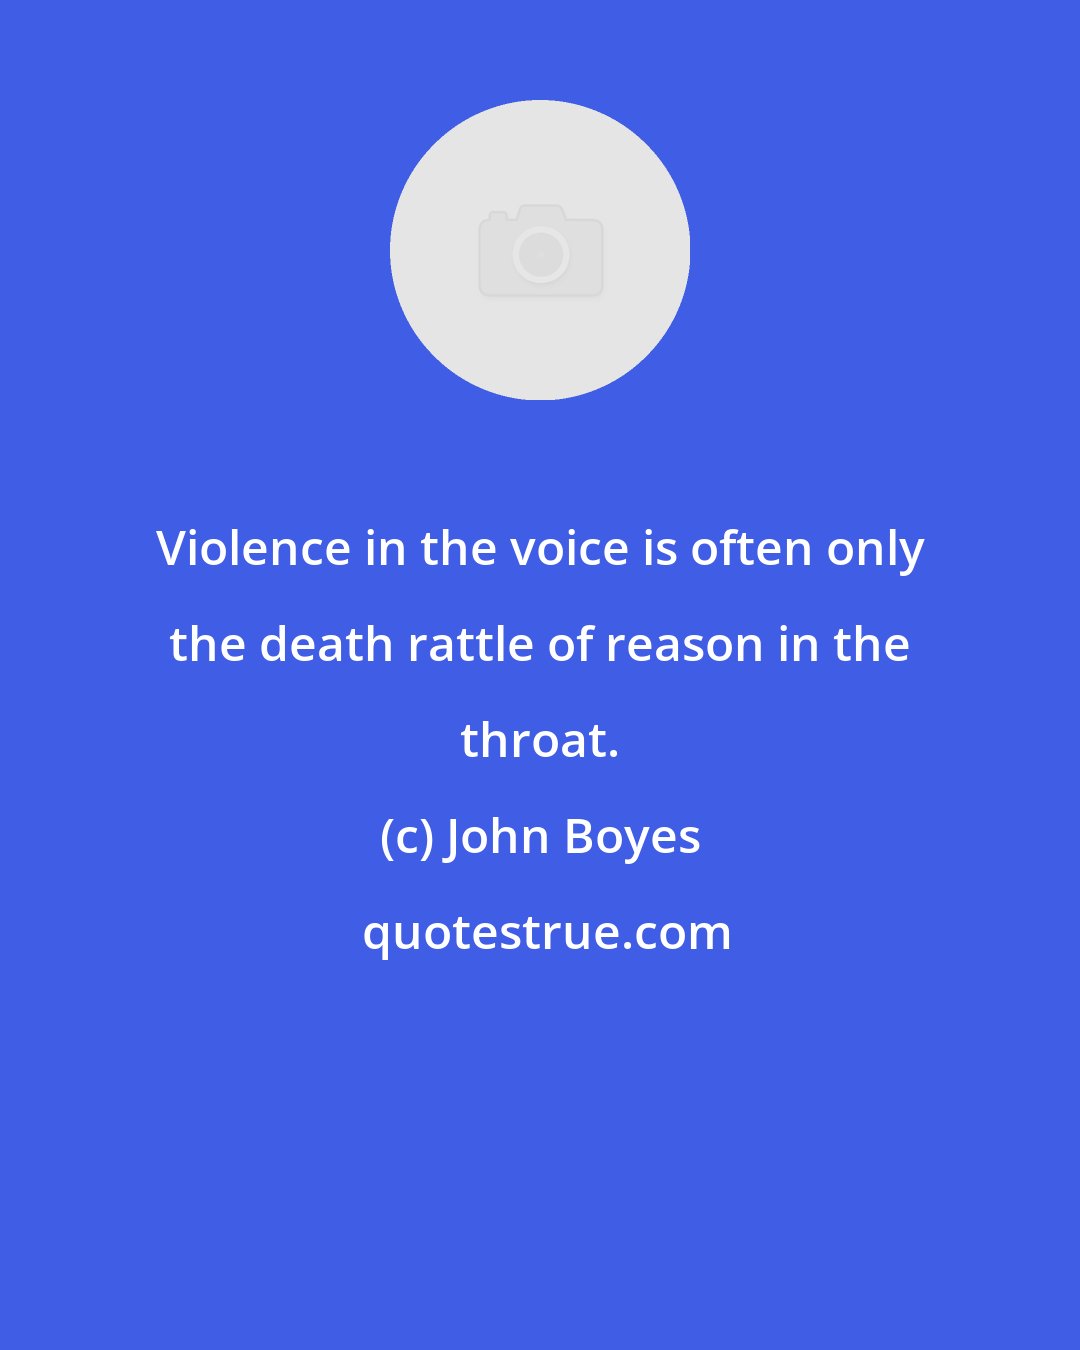 John Boyes: Violence in the voice is often only the death rattle of reason in the throat.